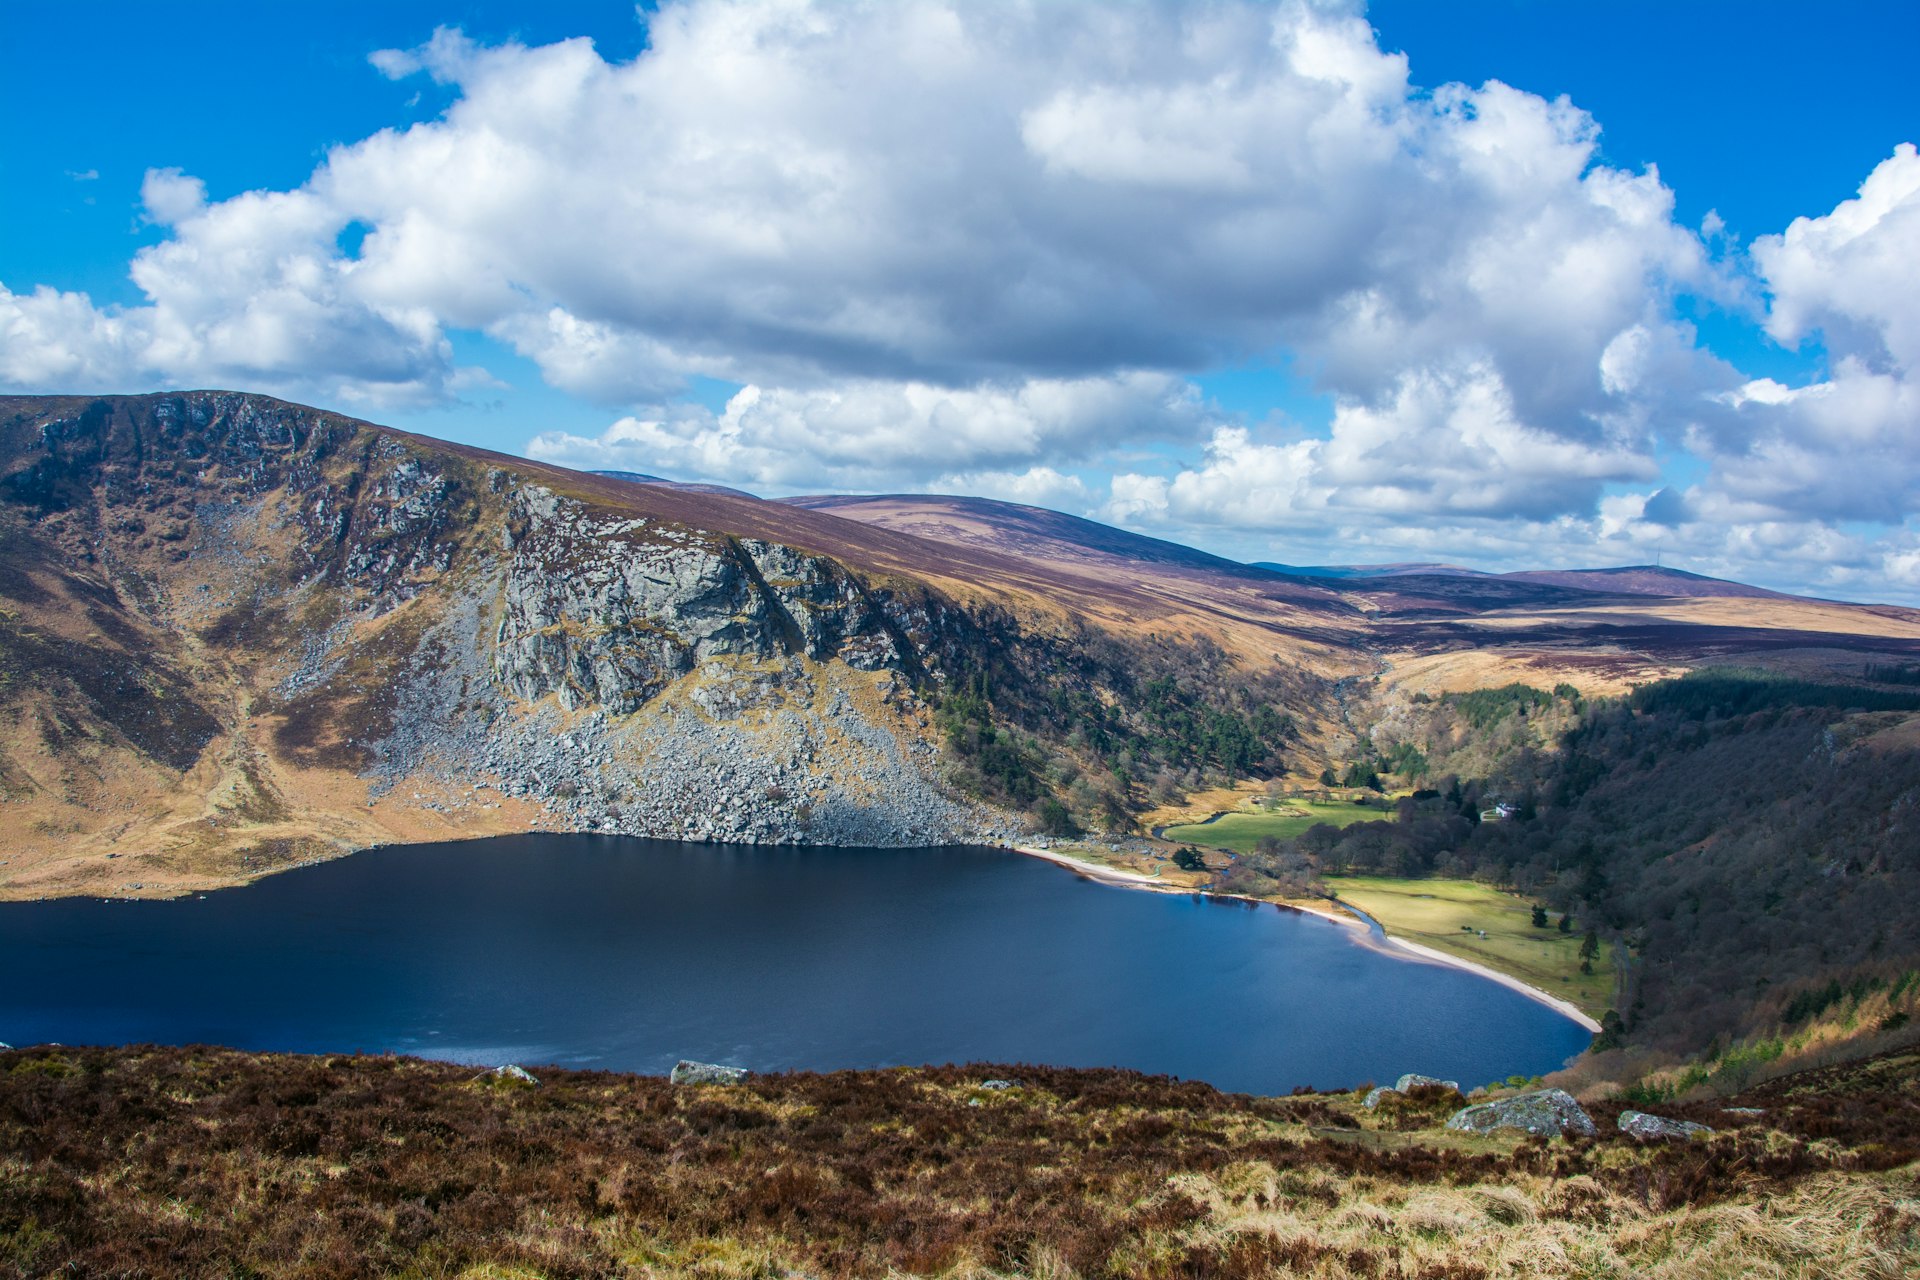 Large white clouds hang over the Wicklow Mountains and below is the sparkling blue waters of Lough Tay